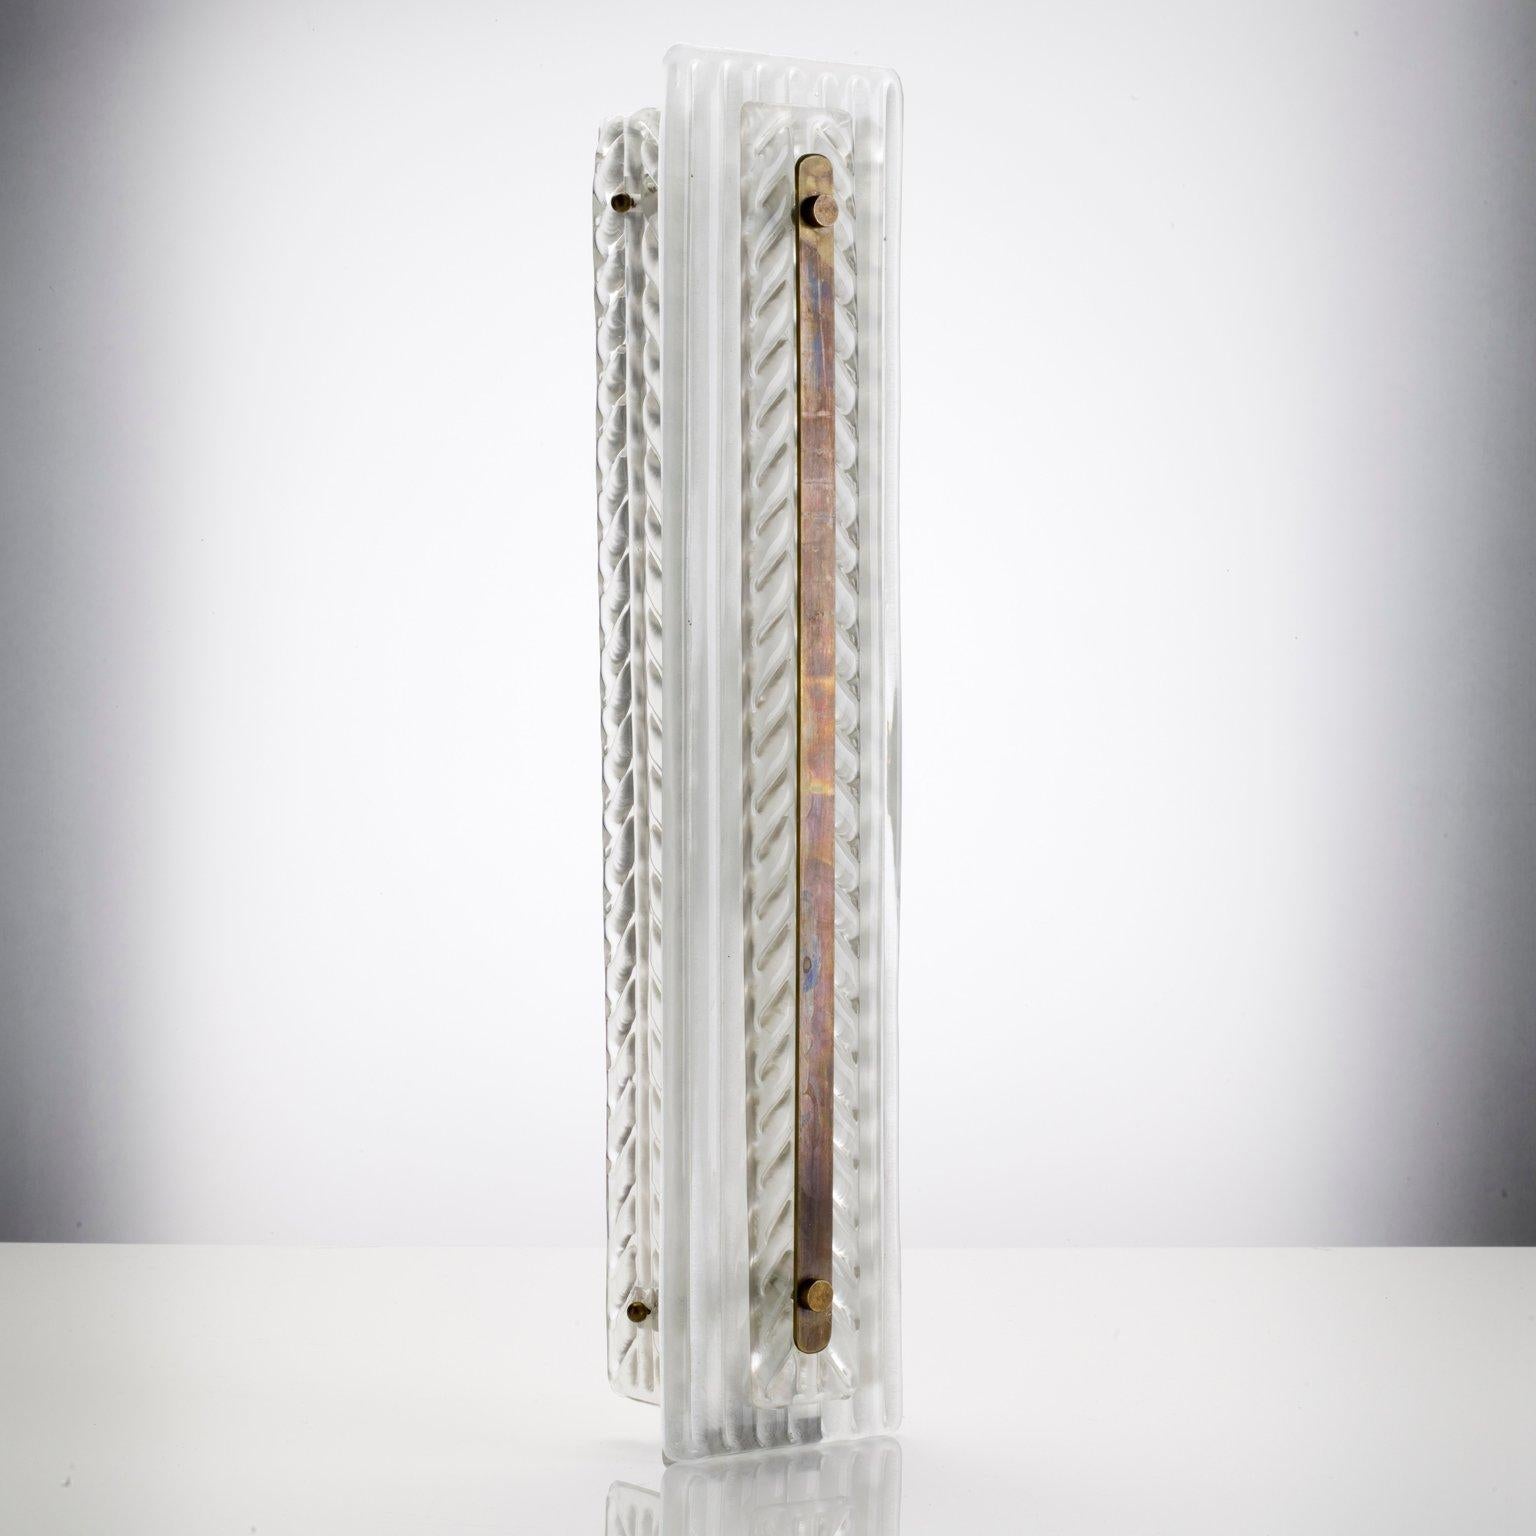 Produced from original Murano glass fixed to a white powder coated frame. The front glass is ribbed with an appliqué with feather style detailing. A brass strip runs the length of the front. Brass finger screws hold the glass to the frame behind.